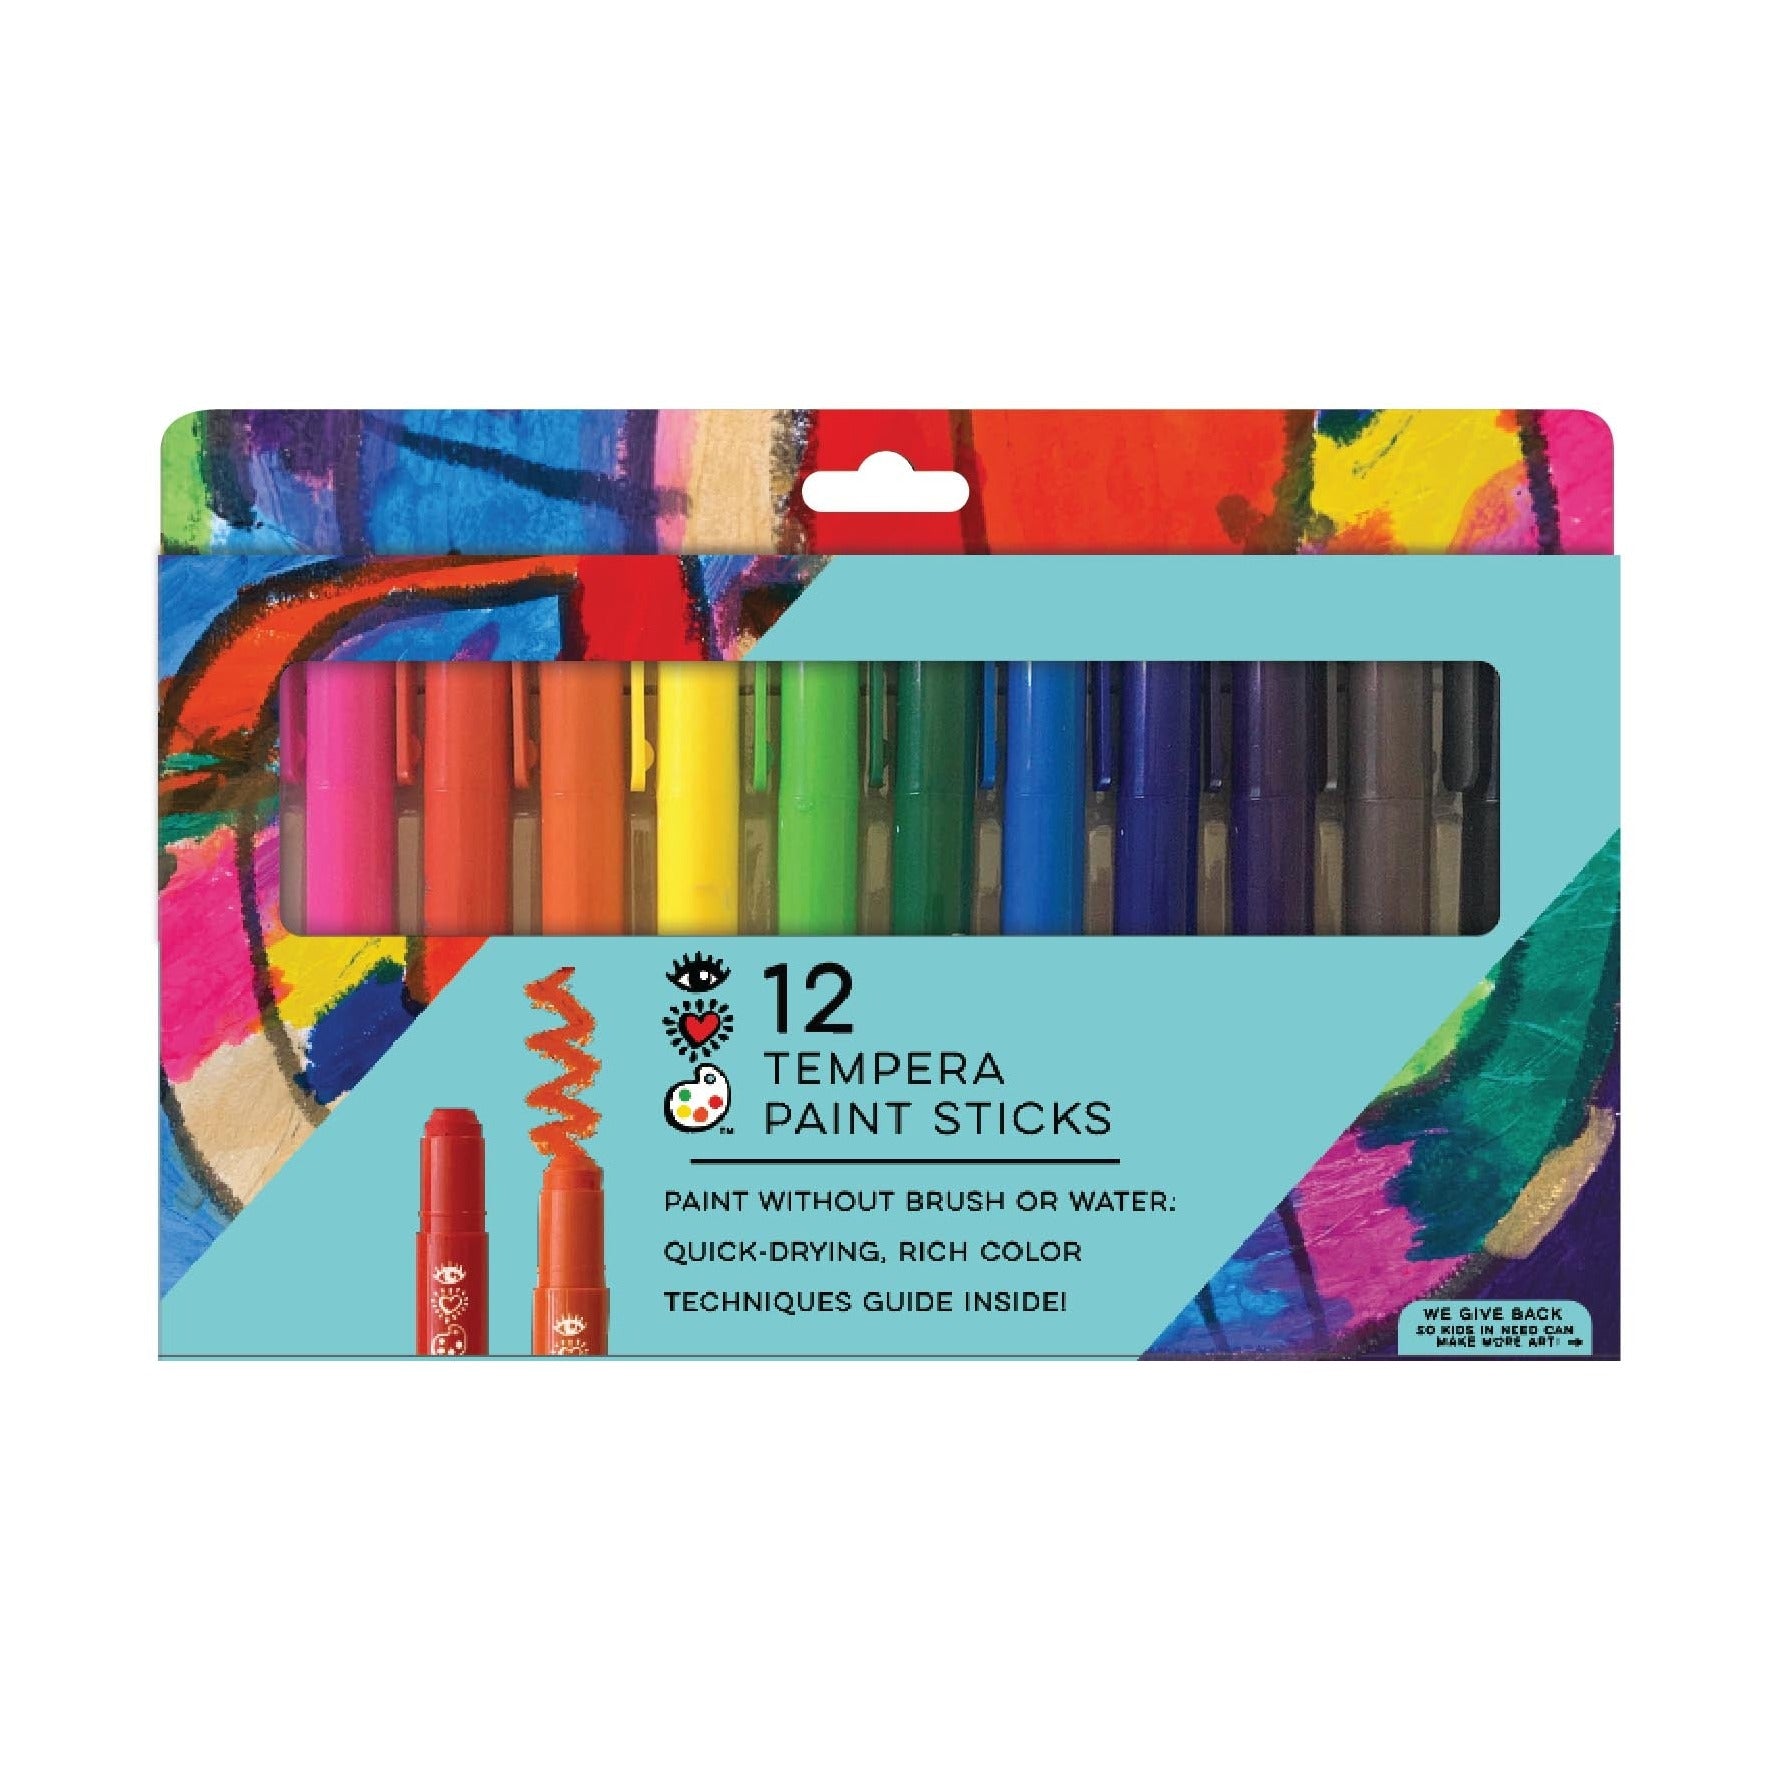 Creativity Street Glide-On Tempera Paint Sticks, 12 Assorted Primary Colors, 5 Grams, 12 per Pack, 2 Packs